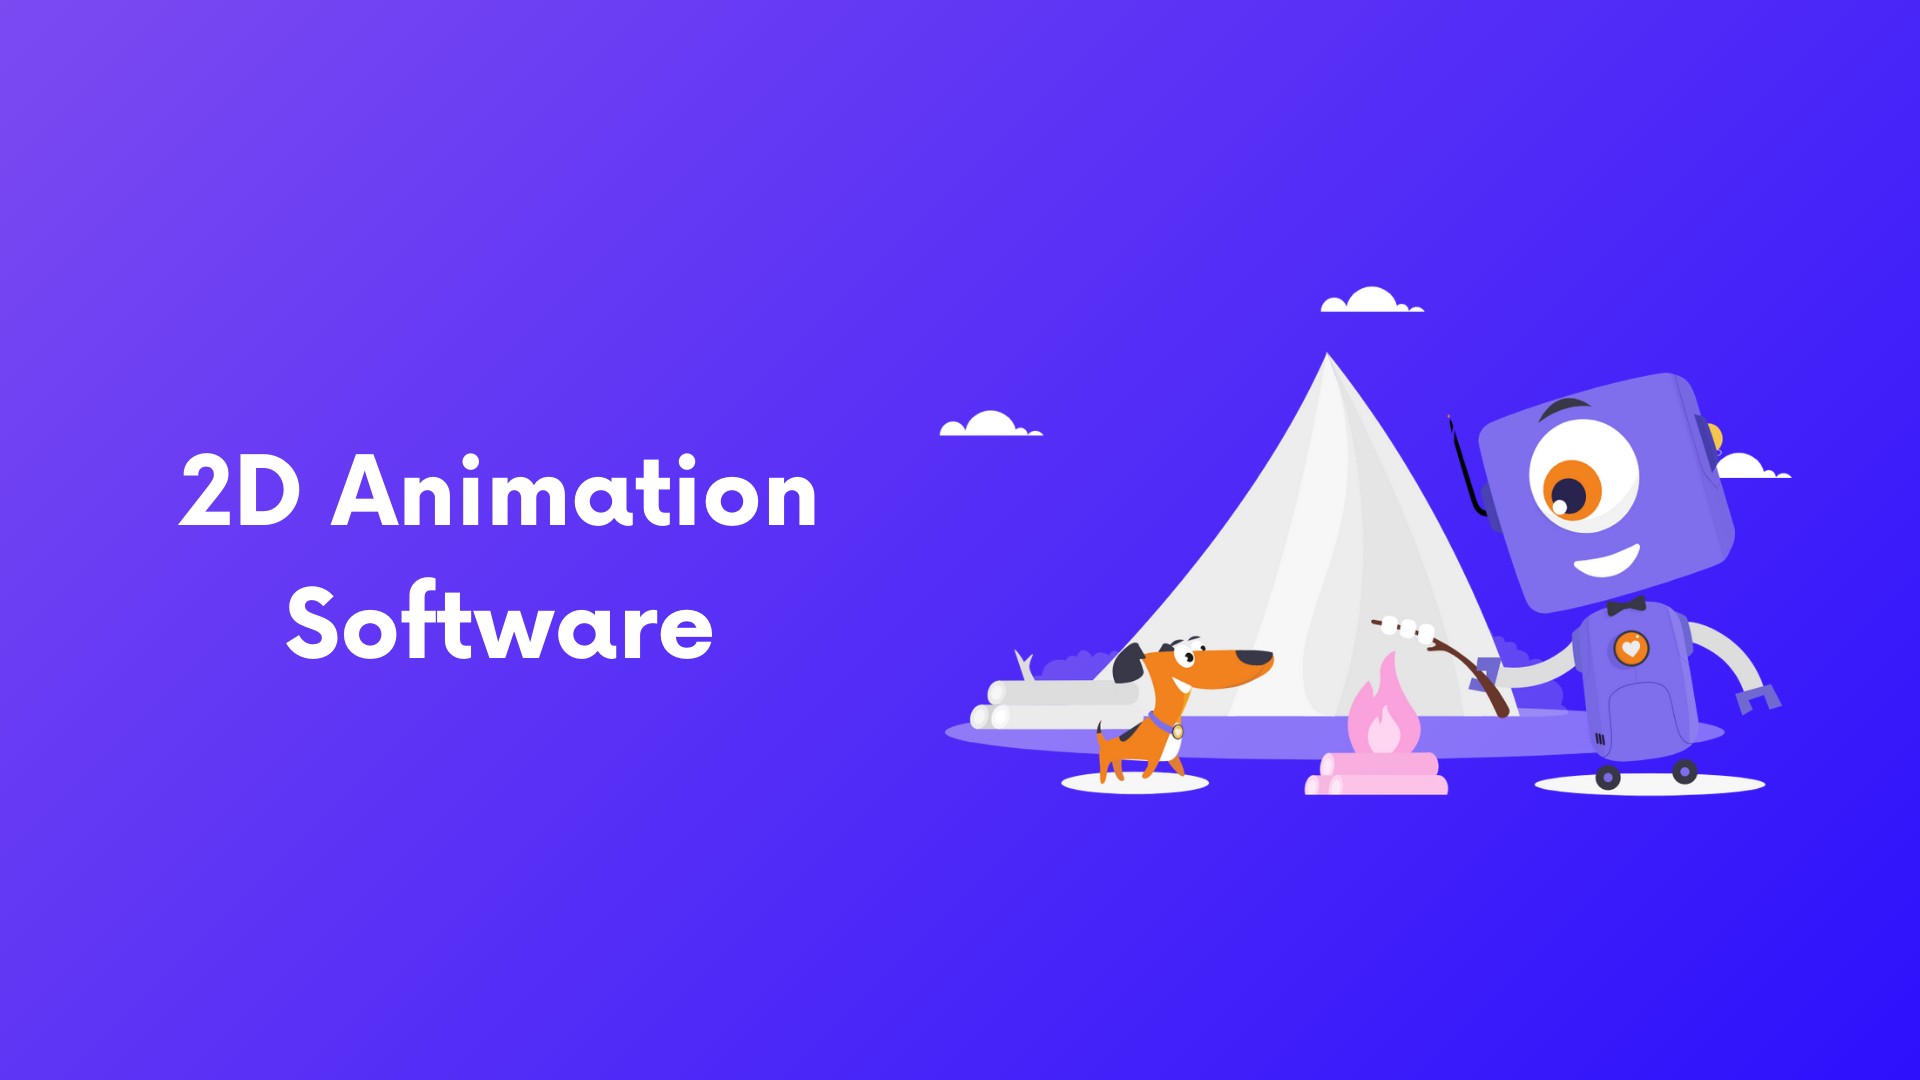 2D Animation Tools: Top 12 Free and Paid 2D Animation Programs in 2022